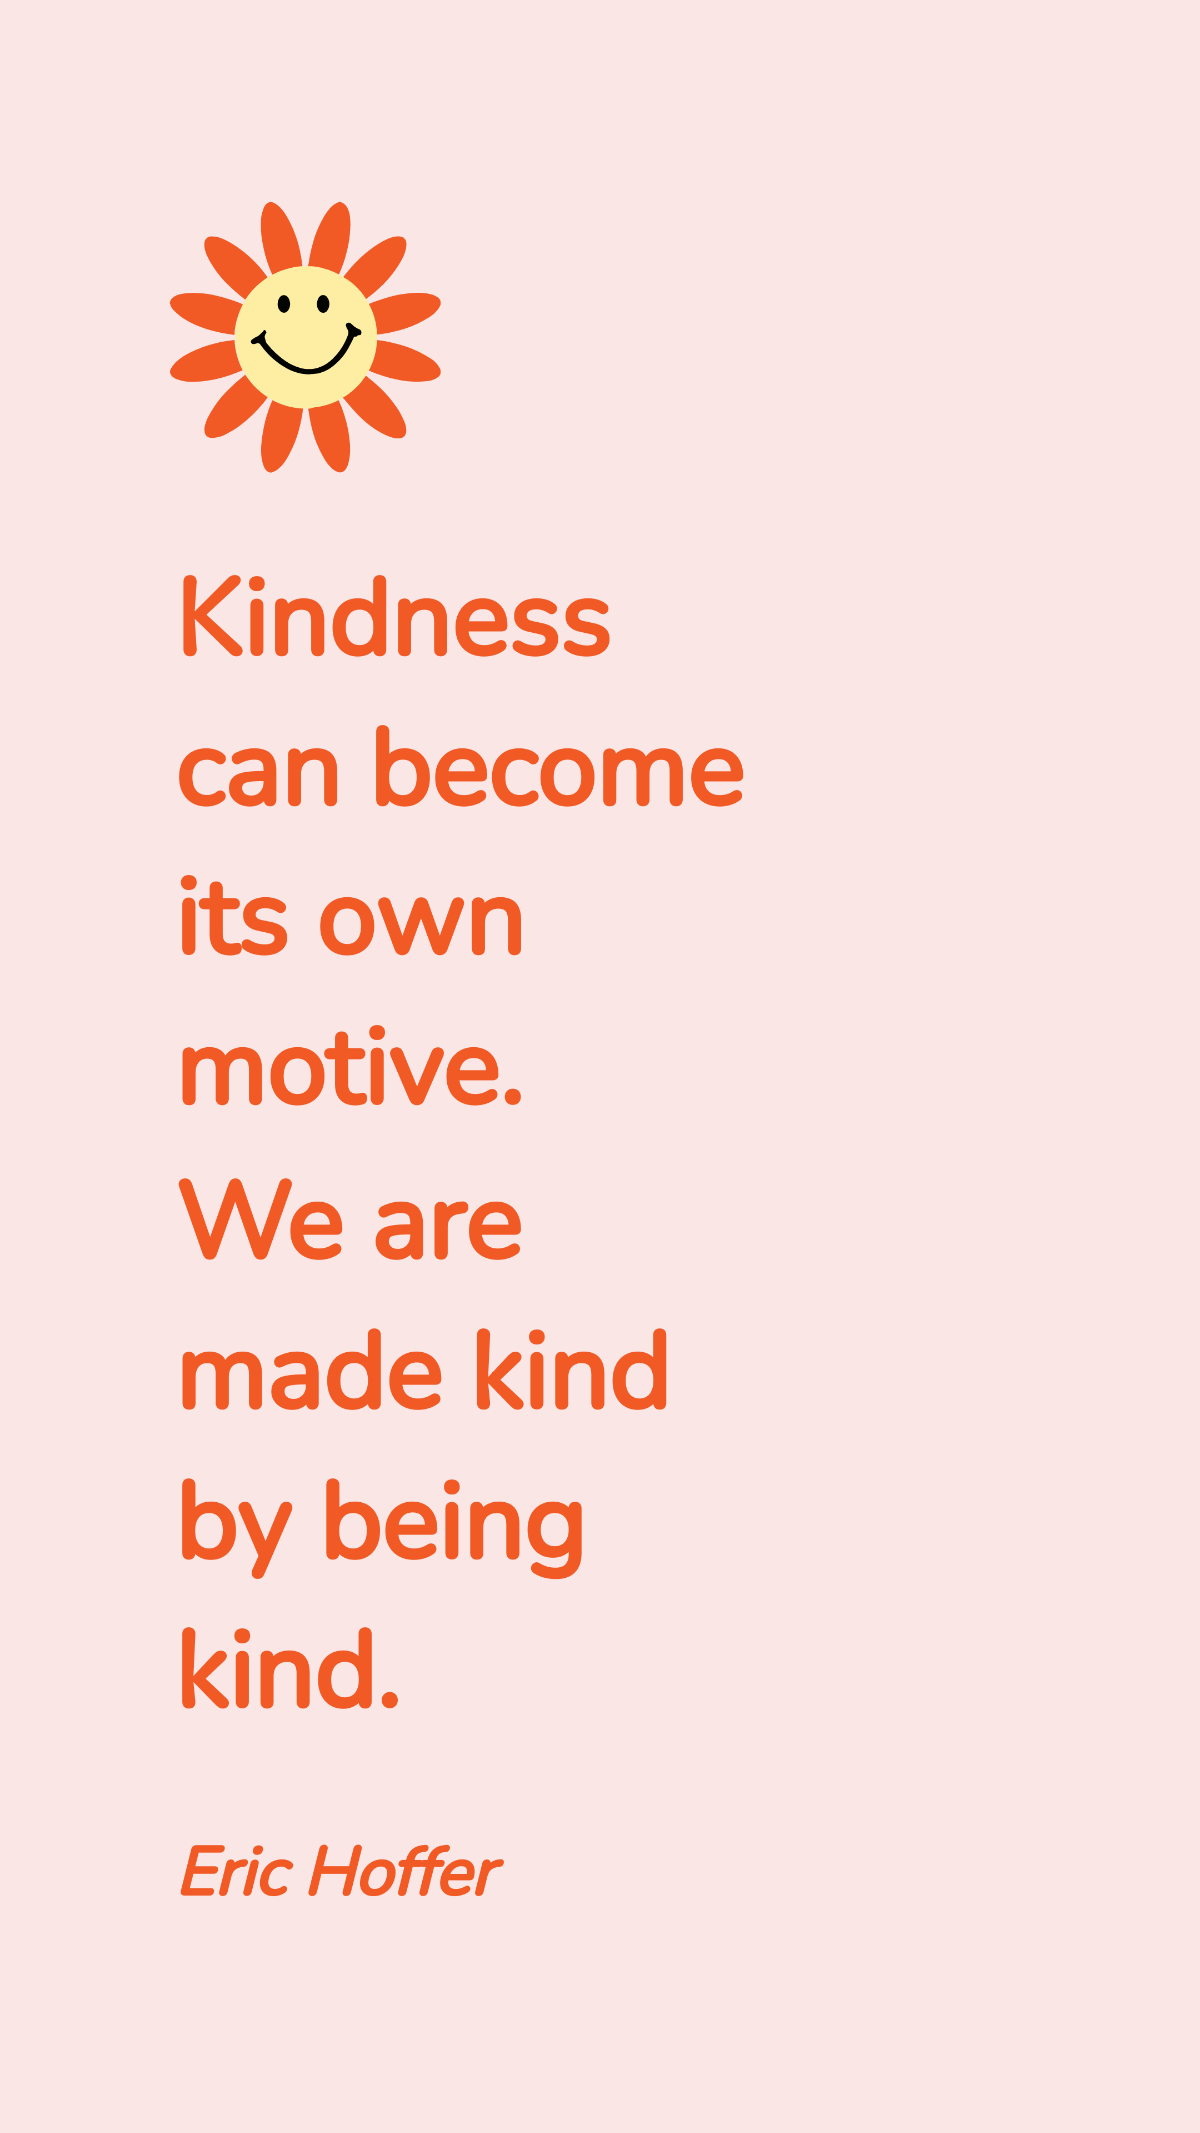 Eric Hoffer - Kindness can become its own motive. We are made kind by being kind.